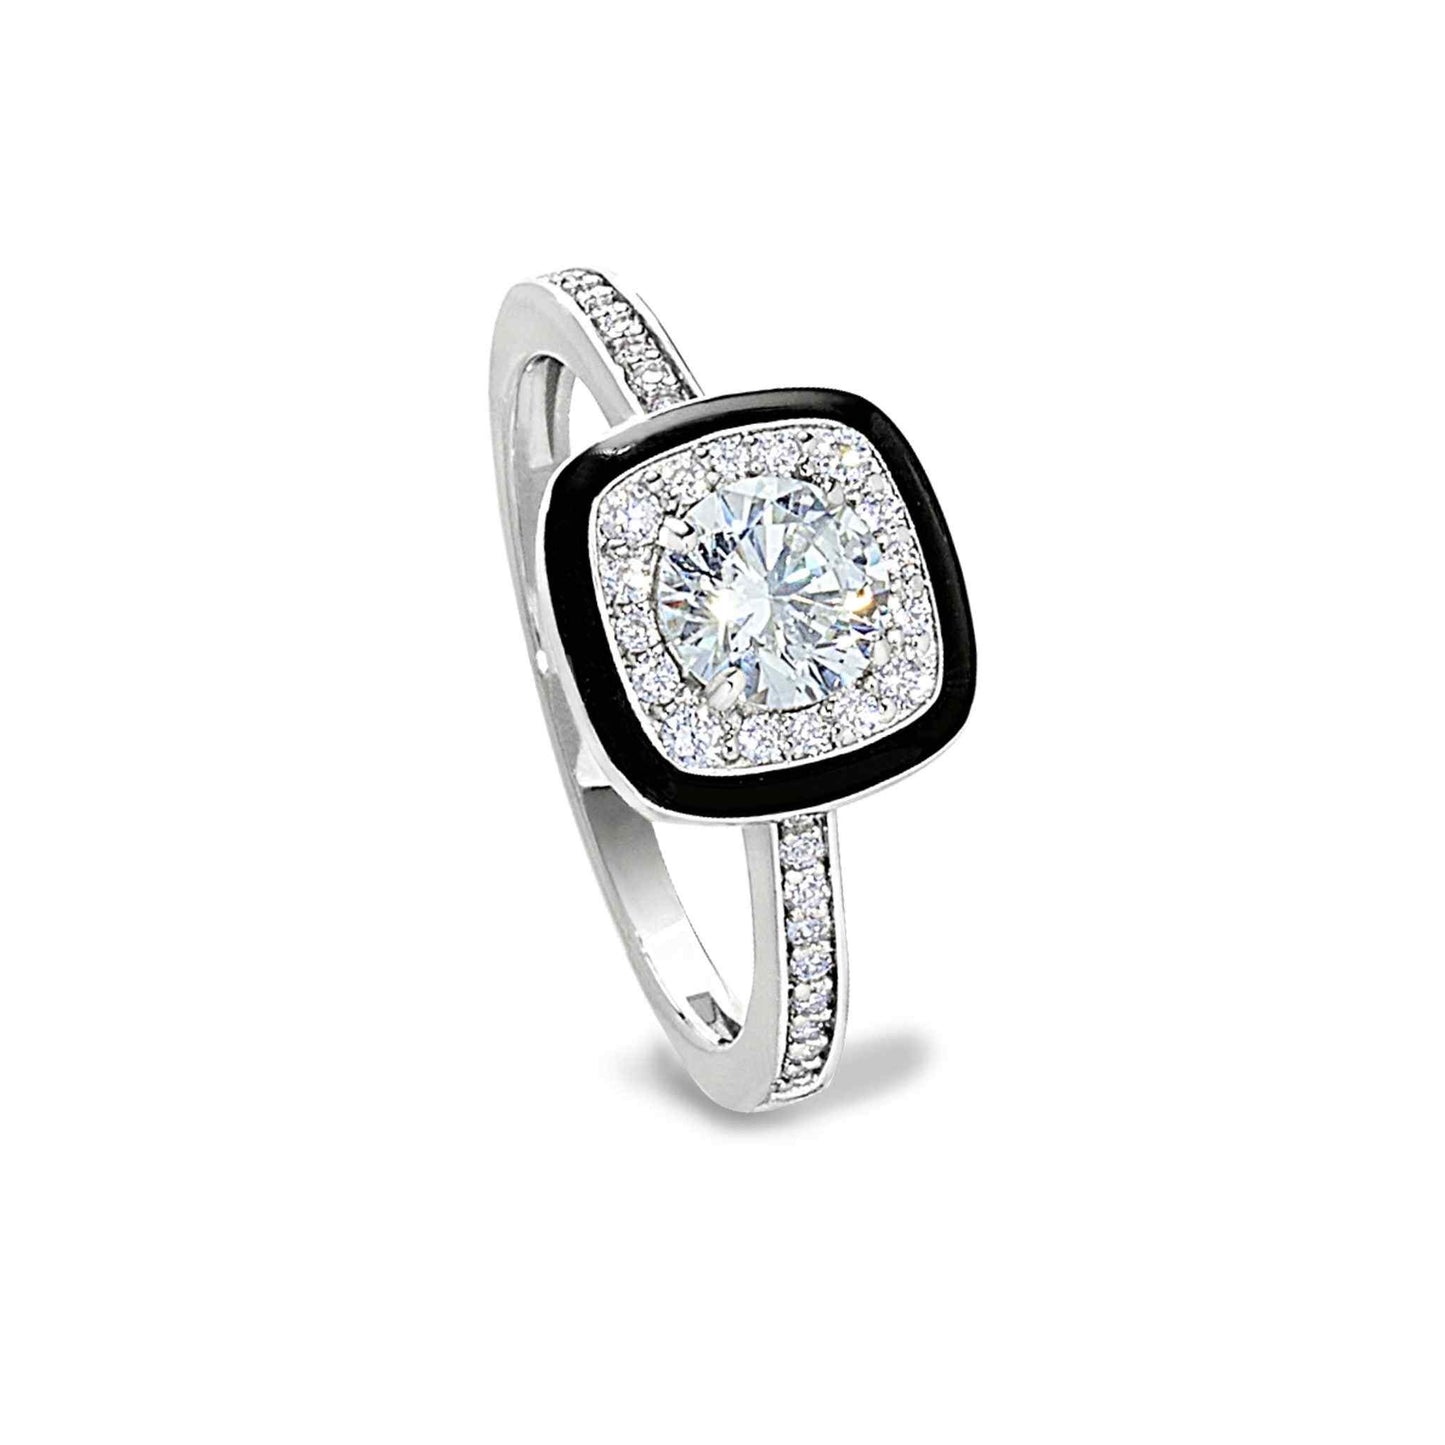 A cushion cut ring with thin black enamel and simulated diamonds displayed on a neutral white background.